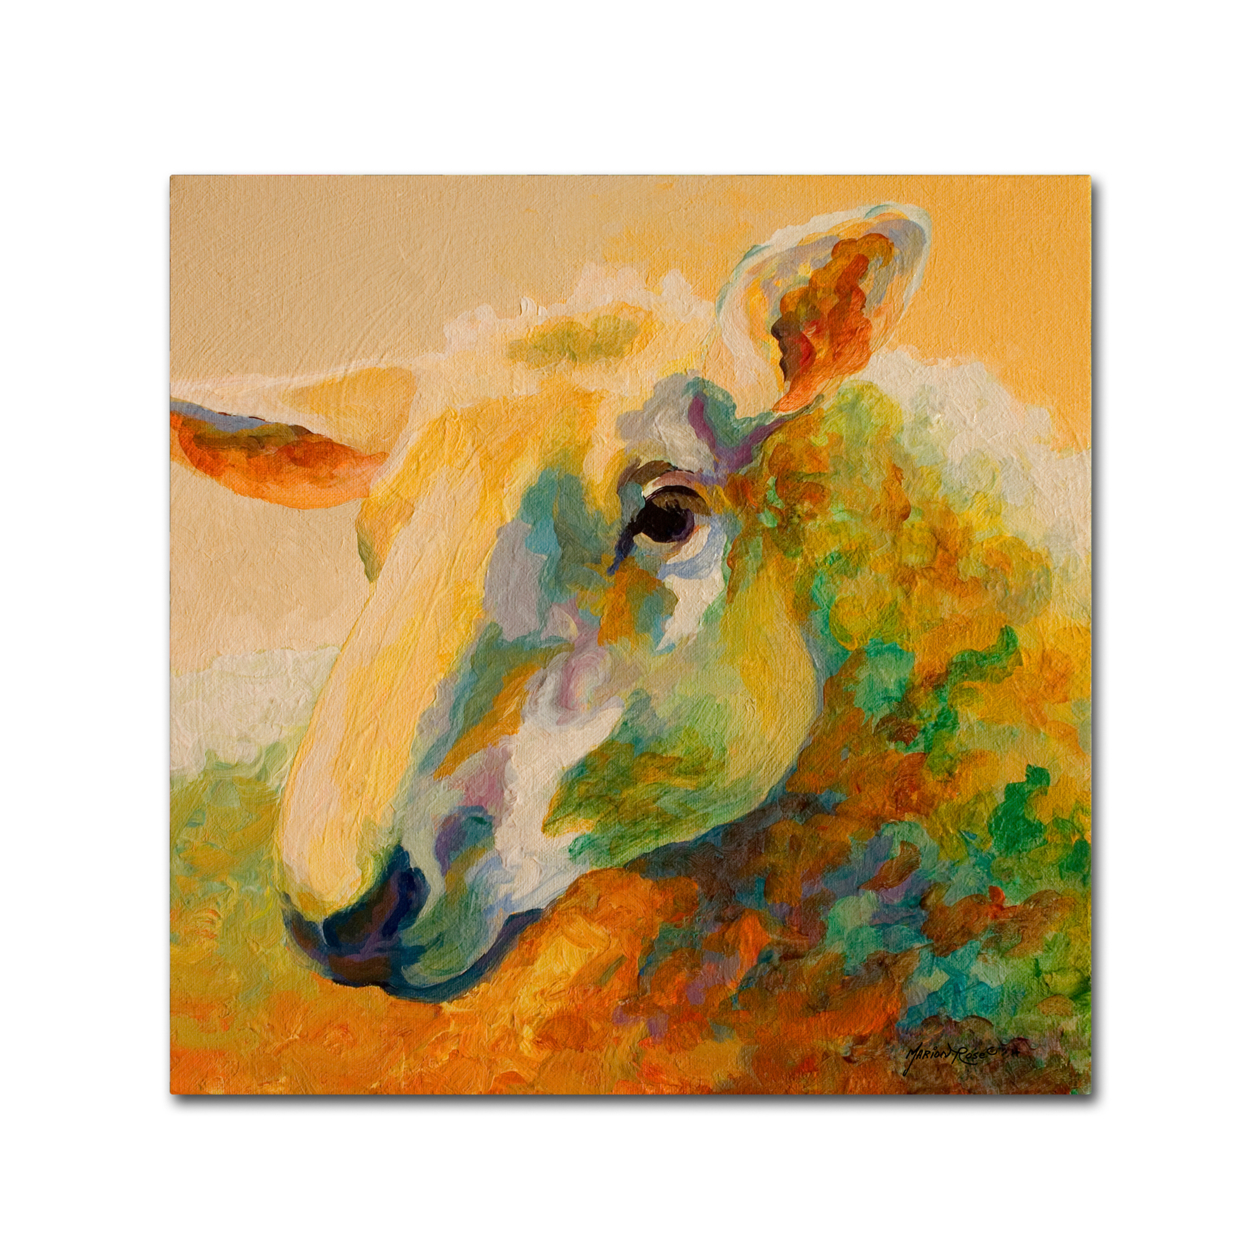 Marion Rose 'Ewe Study III' Ready To Hang Canvas Art 14 X 14 Inches Made In USA